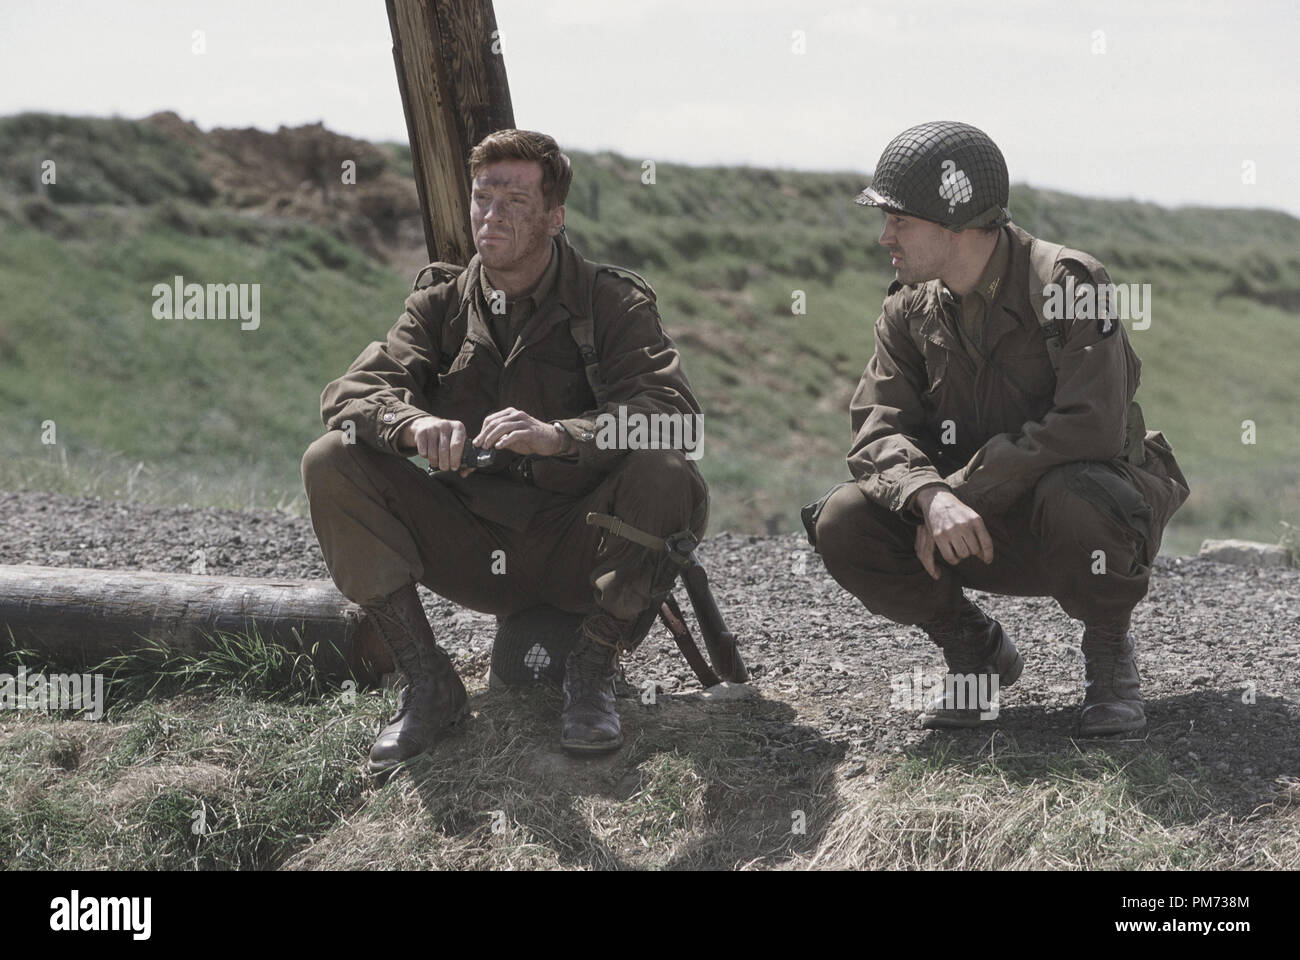 Film Still / Publicity Still from 'Band of Brothers' Damian Lewis, Ron Livingston 2001 Photo credit: David James   File Reference # 308471417THA  For Editorial Use Only -  All Rights Reserved Stock Photo